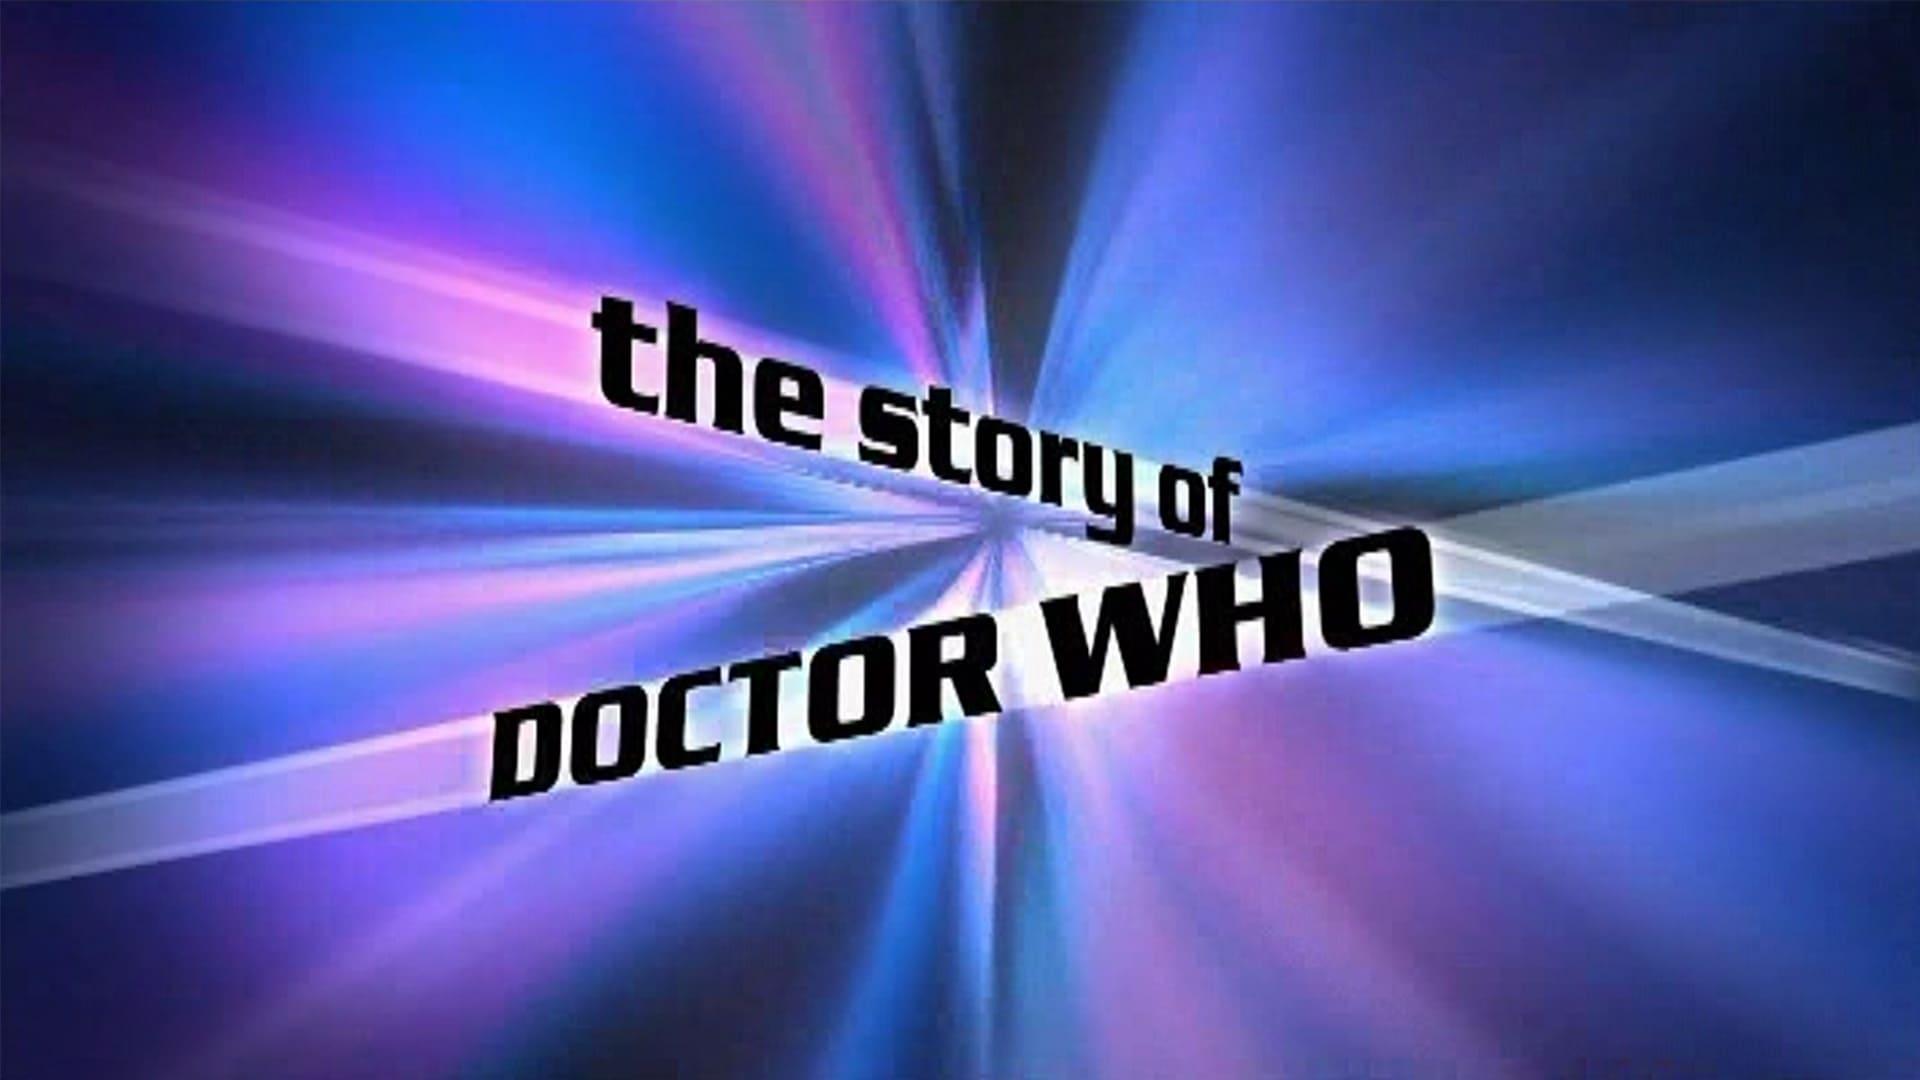 The Story of Doctor Who backdrop